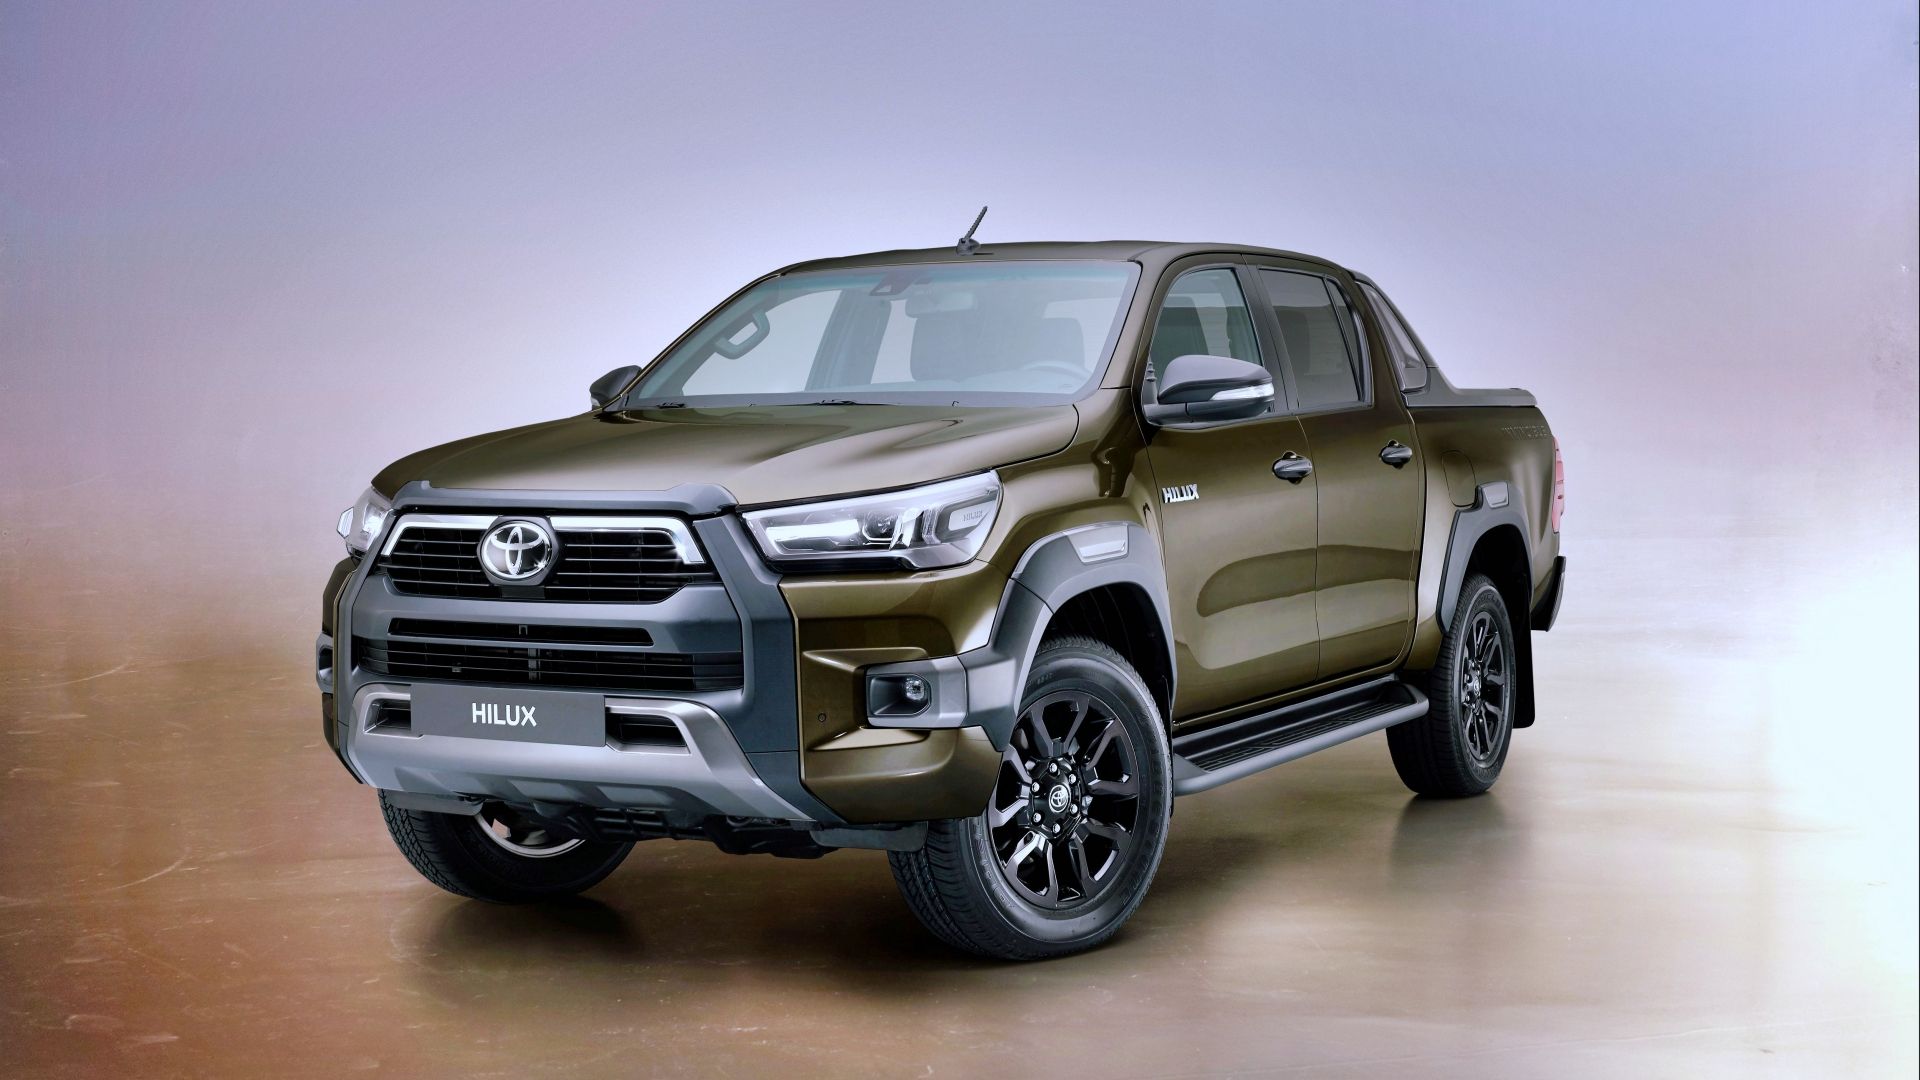 Here's Why The Toyota Tacoma Is NOT An American Hilux